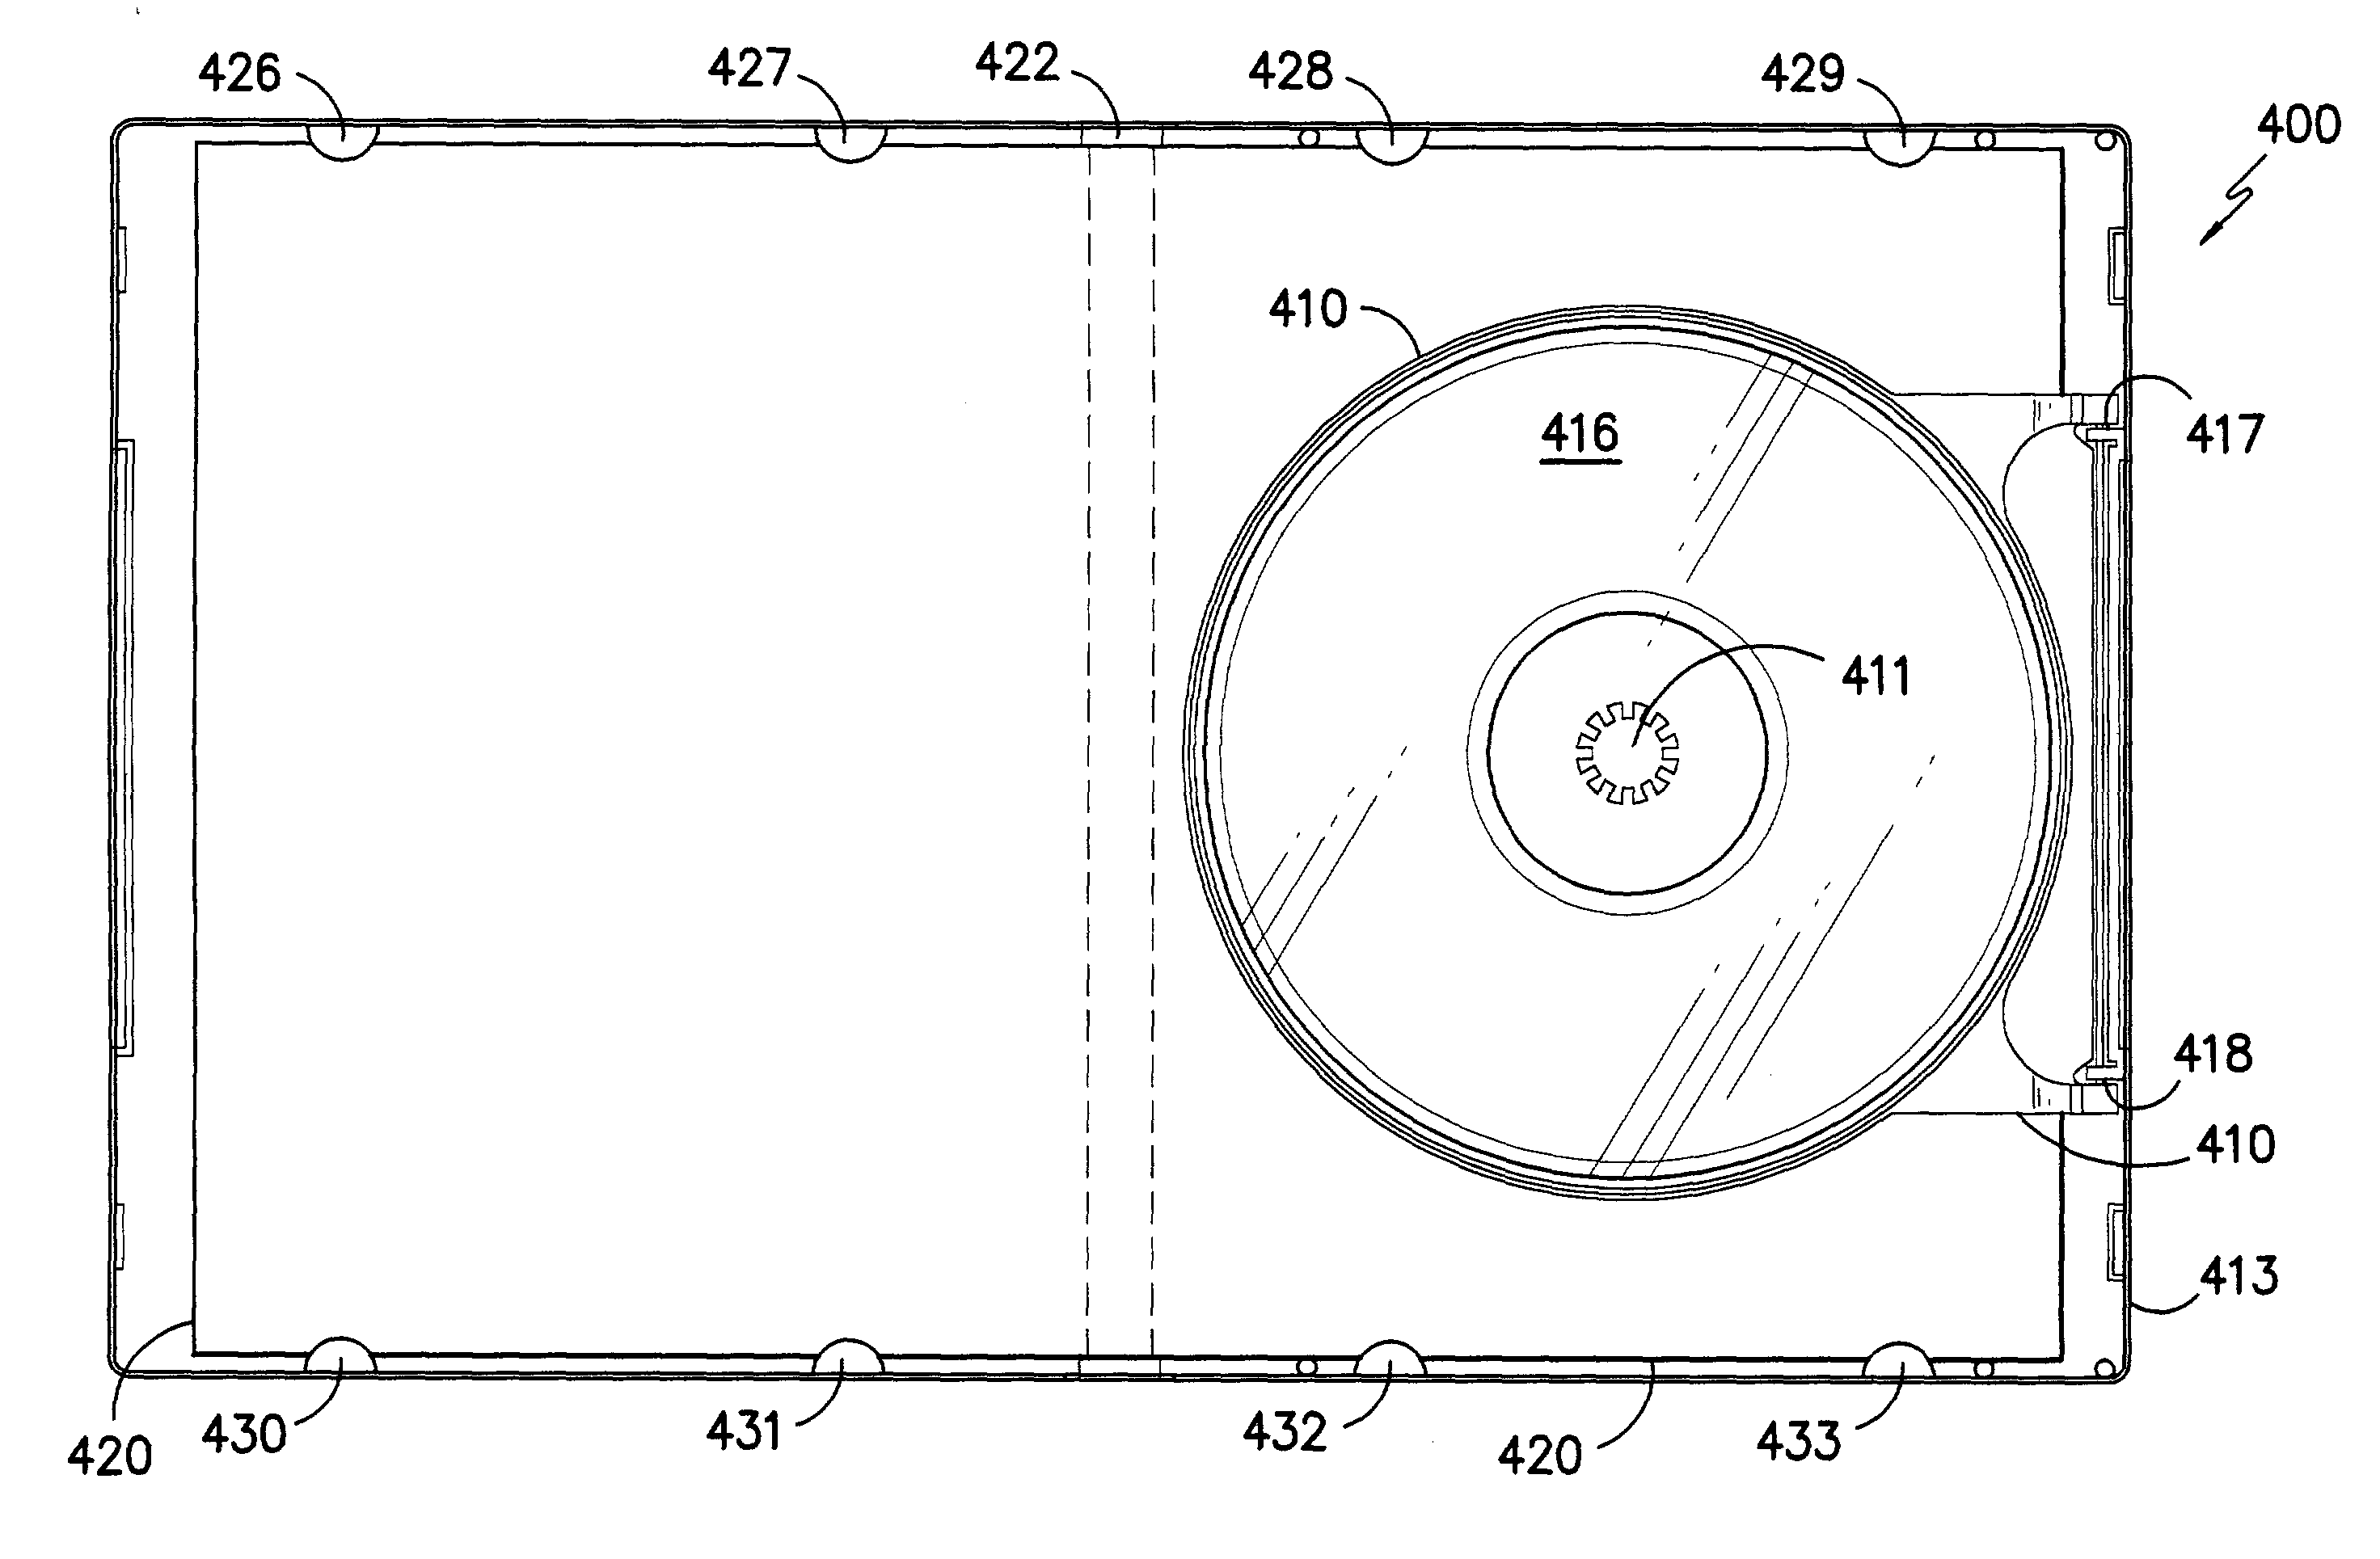 Disc holding trays for antitheft purposes within optical or audio disc storage units